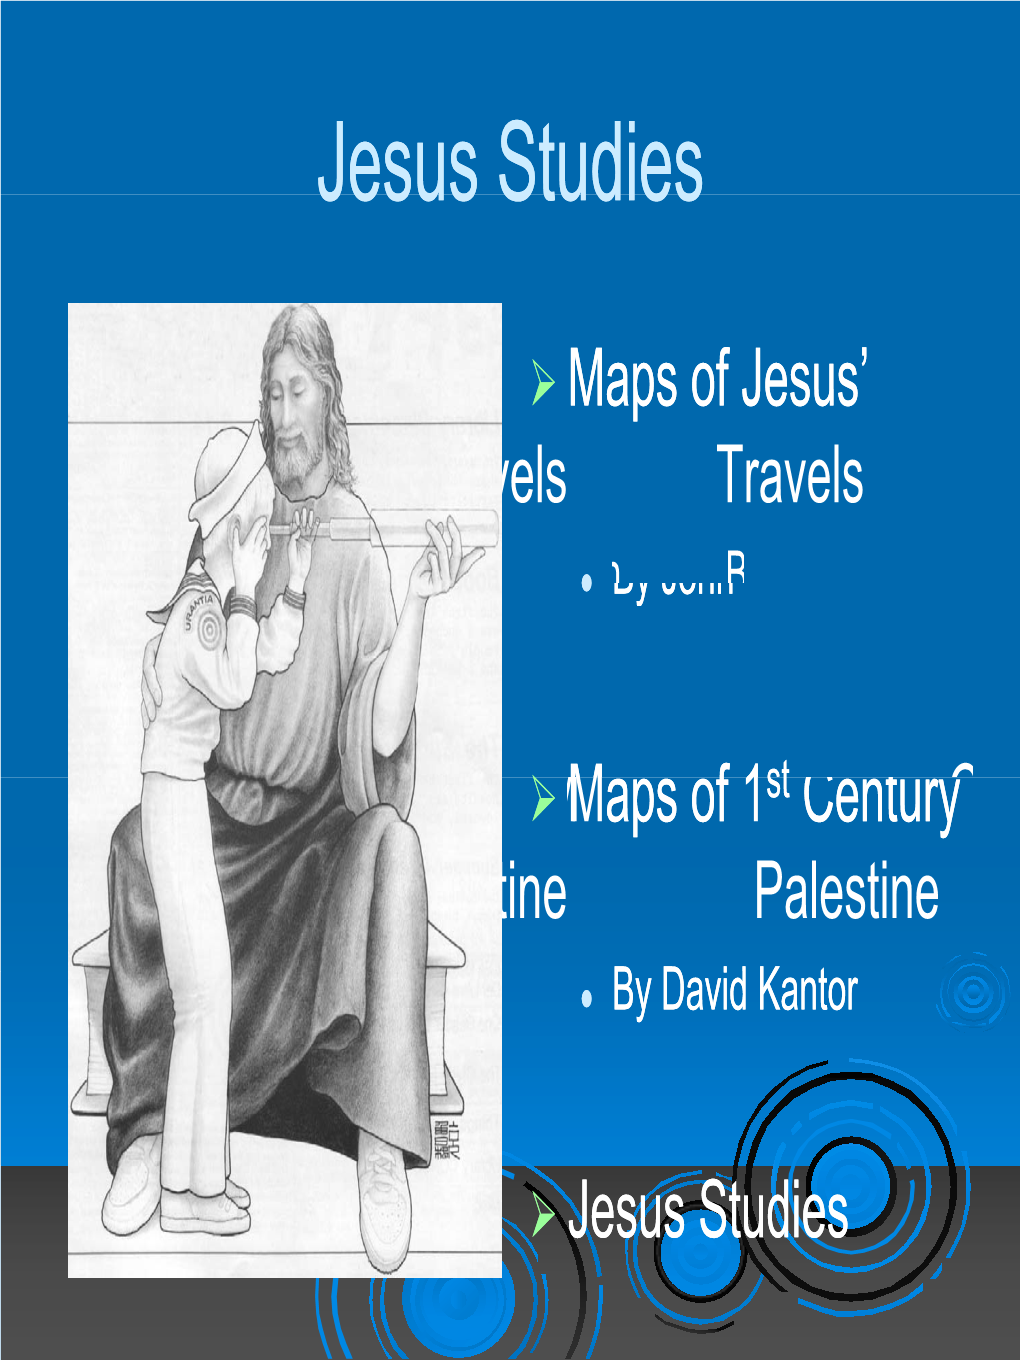 Maps of Jesus' Life and Travels